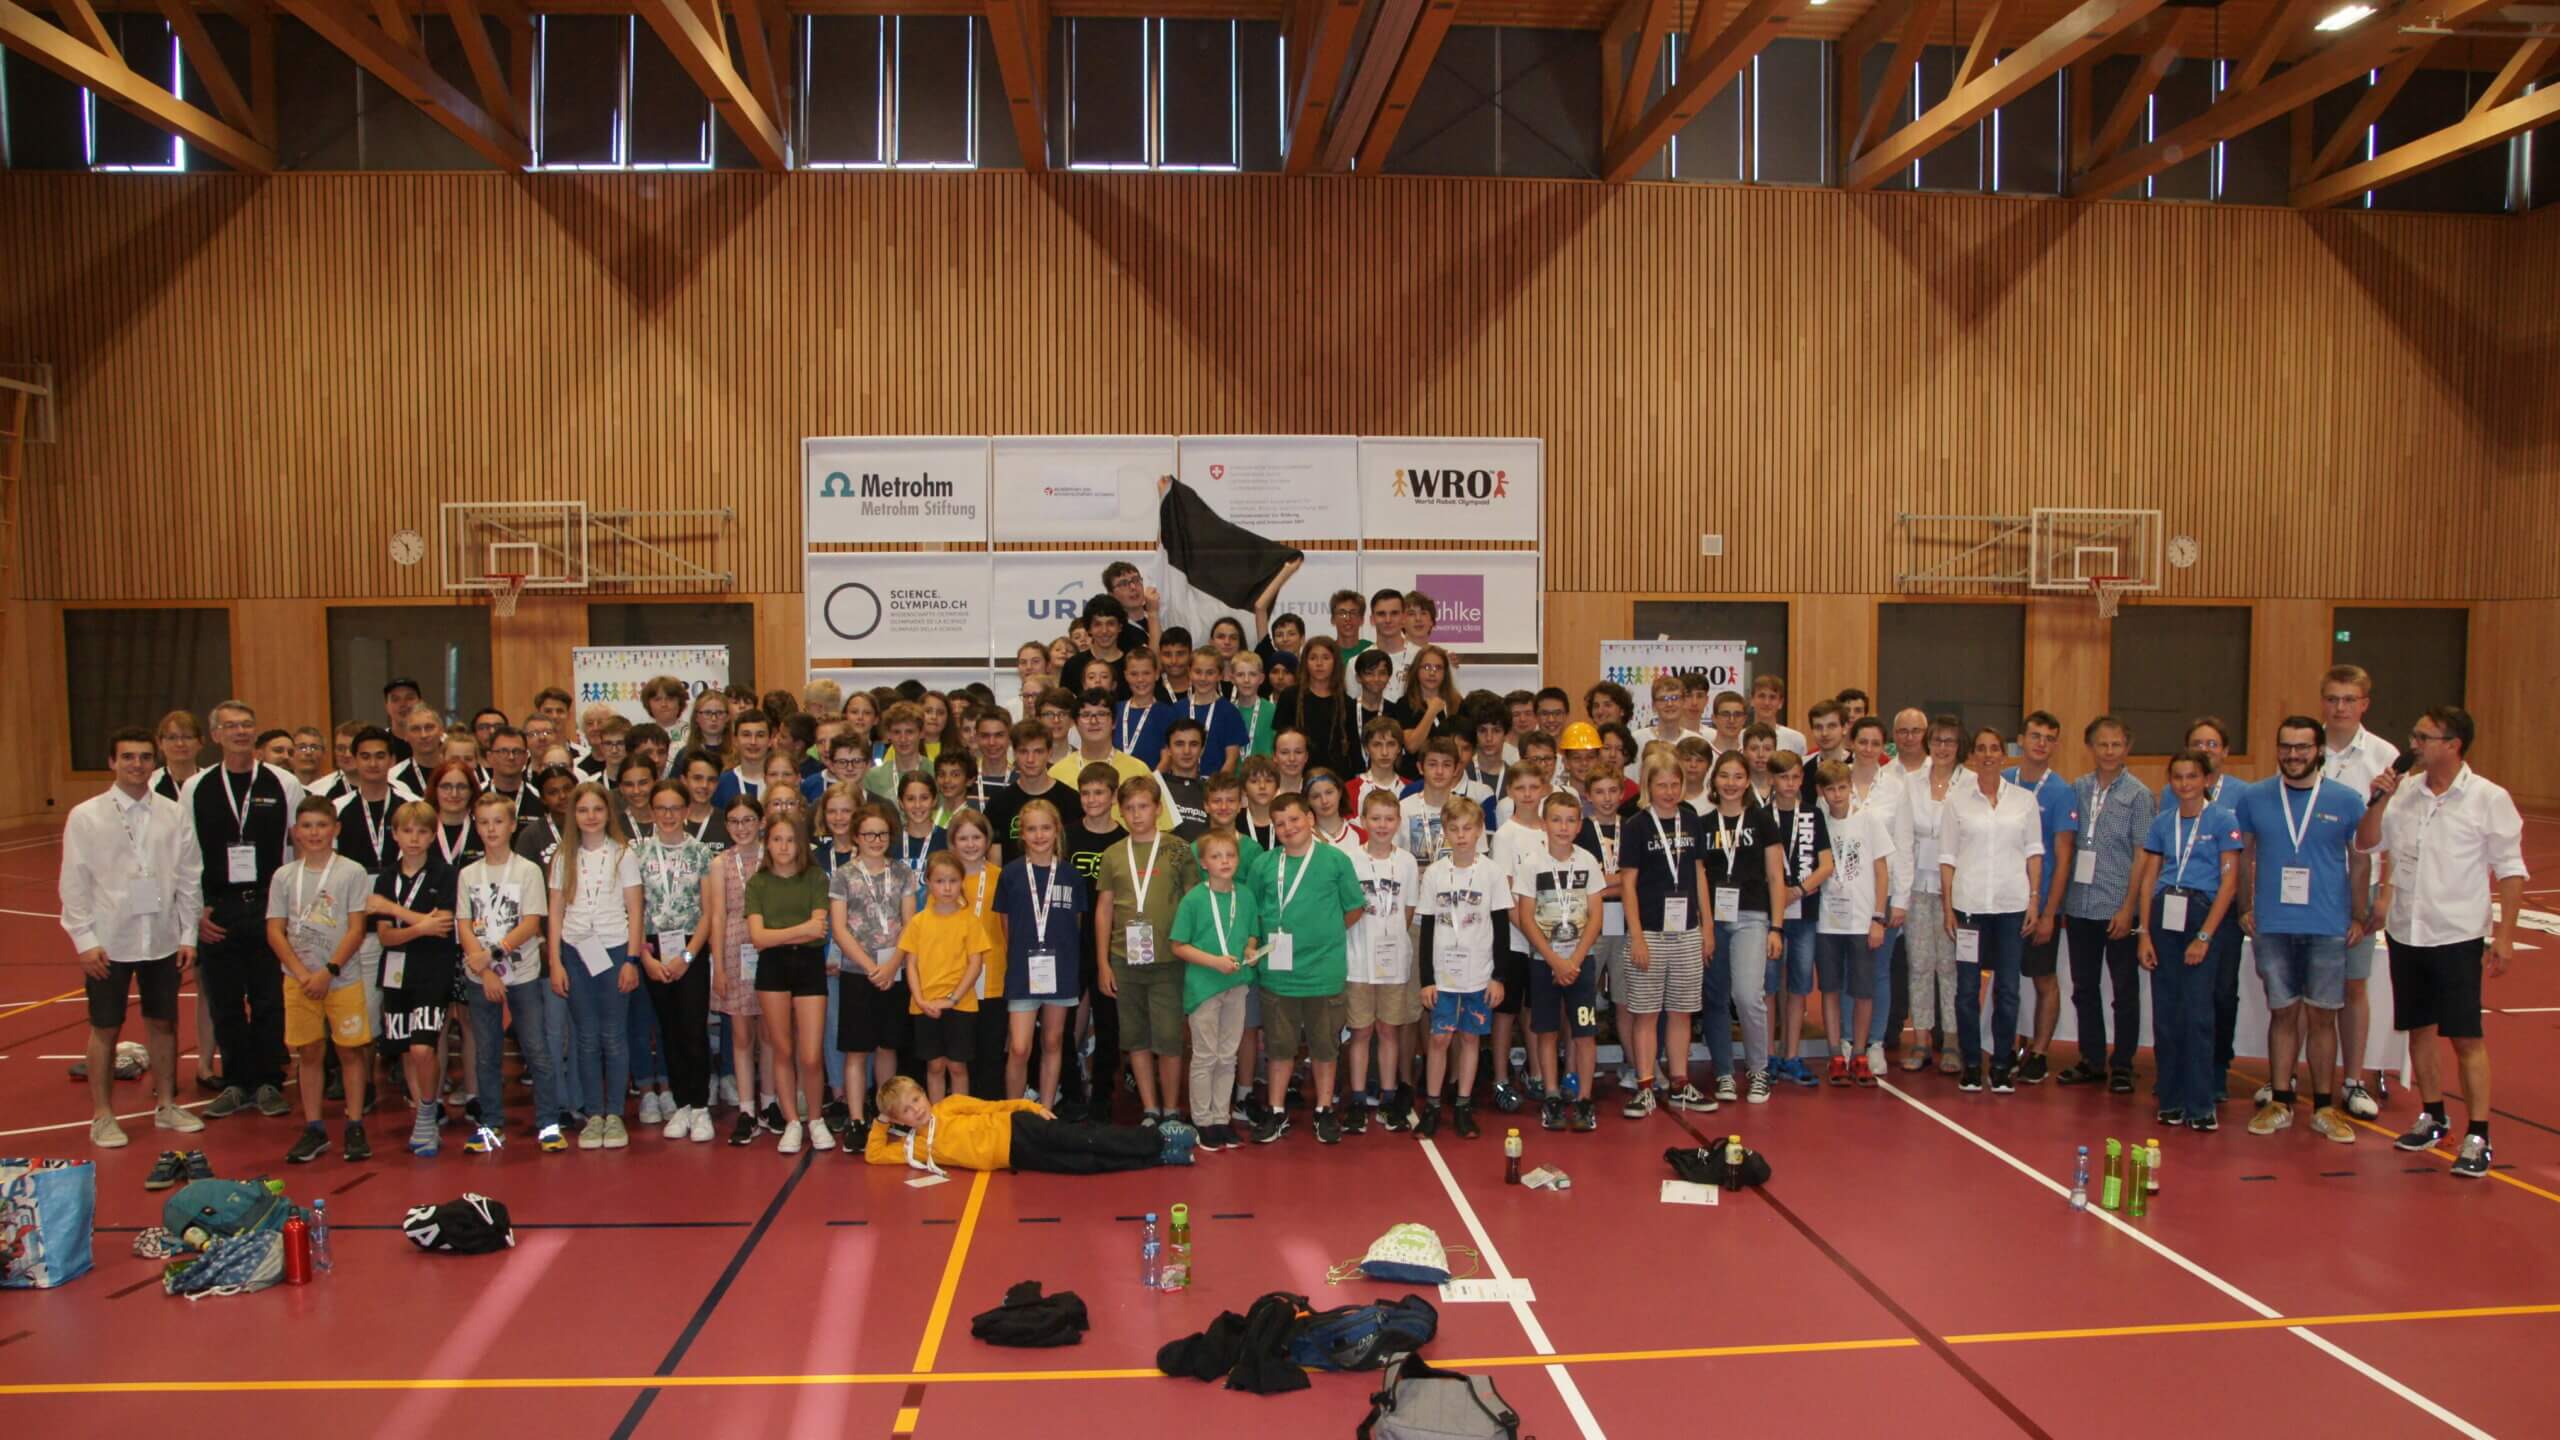 All participants in the Swiss Finals